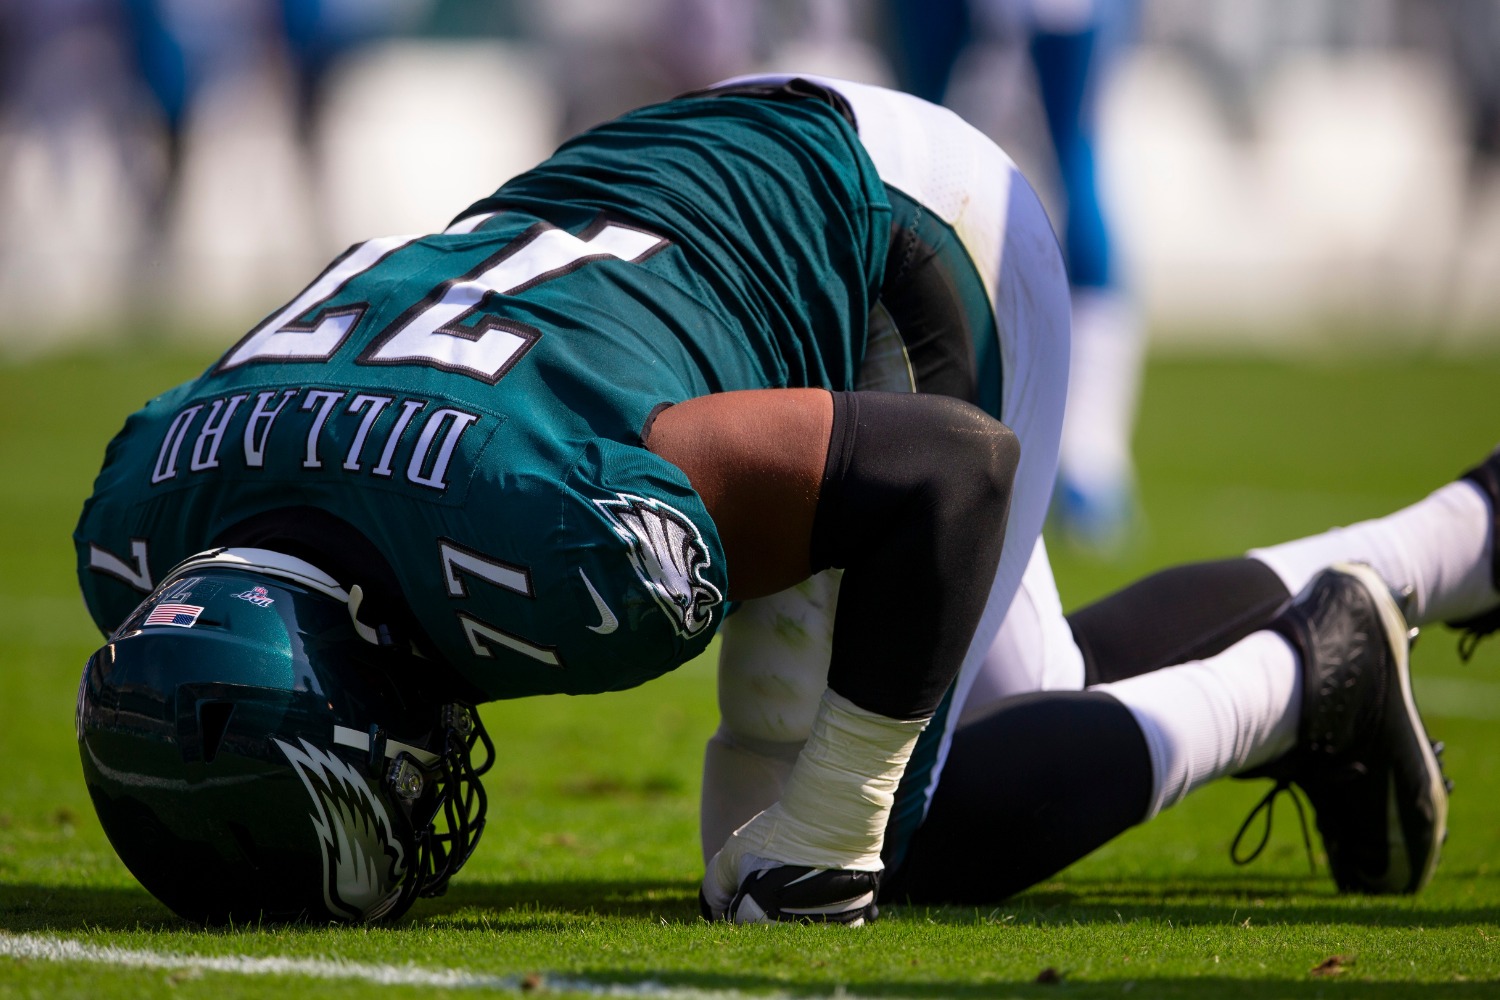 Carson Wentz and the Eagles just suffered a brutal blow to their Super Bowl chances with left tackle Andre Dillard suffering a biceps tear.